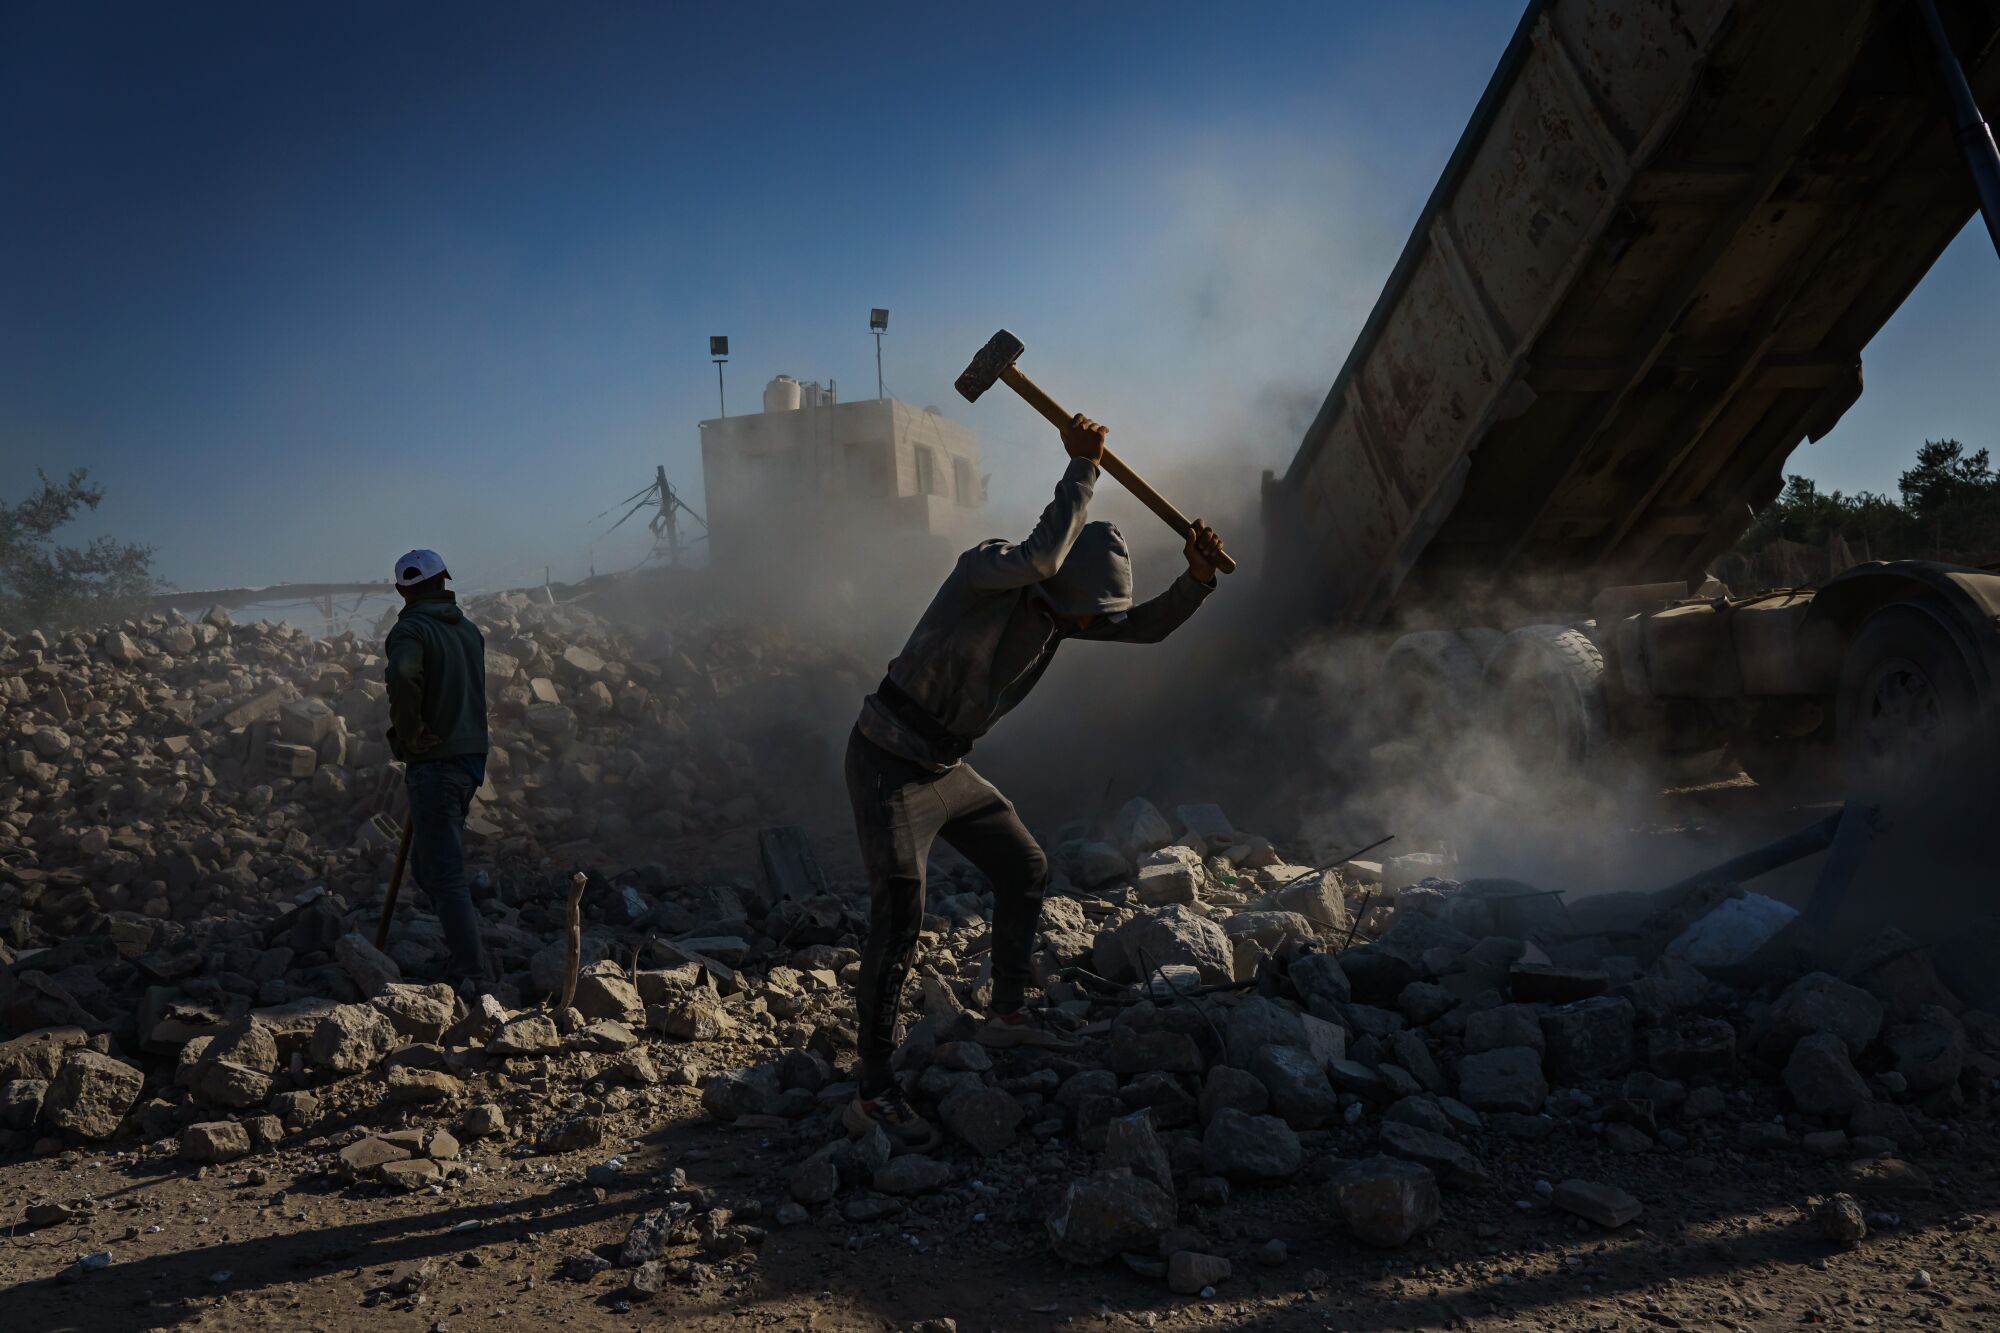 A worker with a sledgehammer breaks up pieces of rubble.